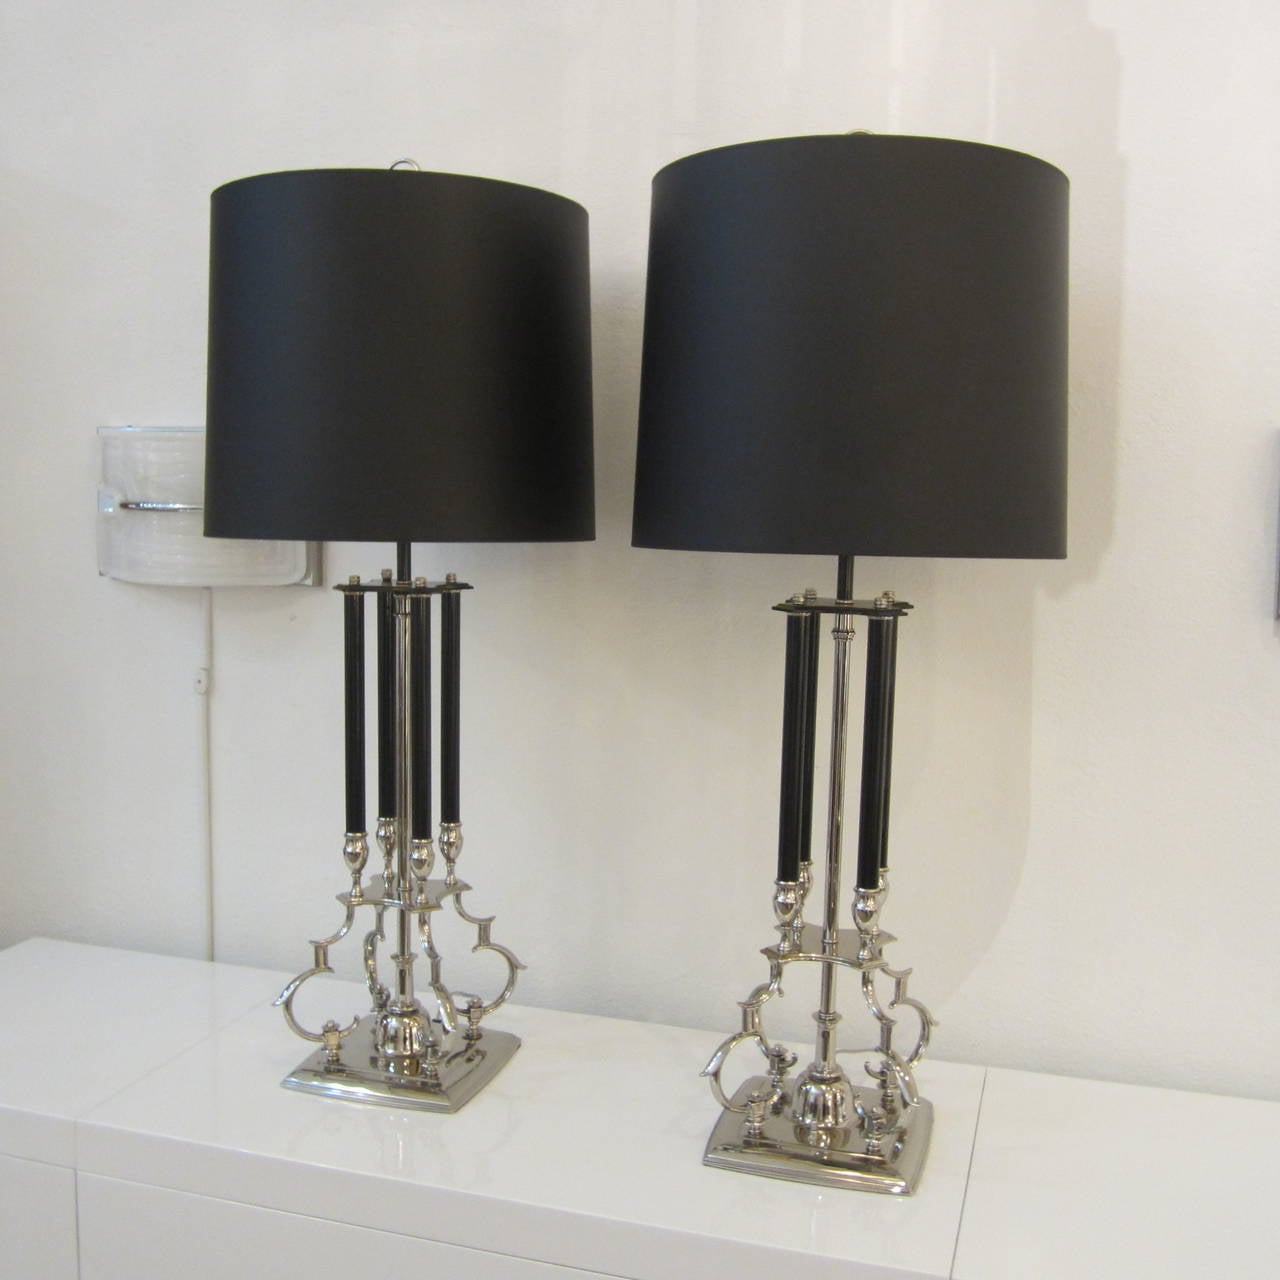 Columned Lamps with Scrolled Metalwork In Excellent Condition For Sale In Miami, FL